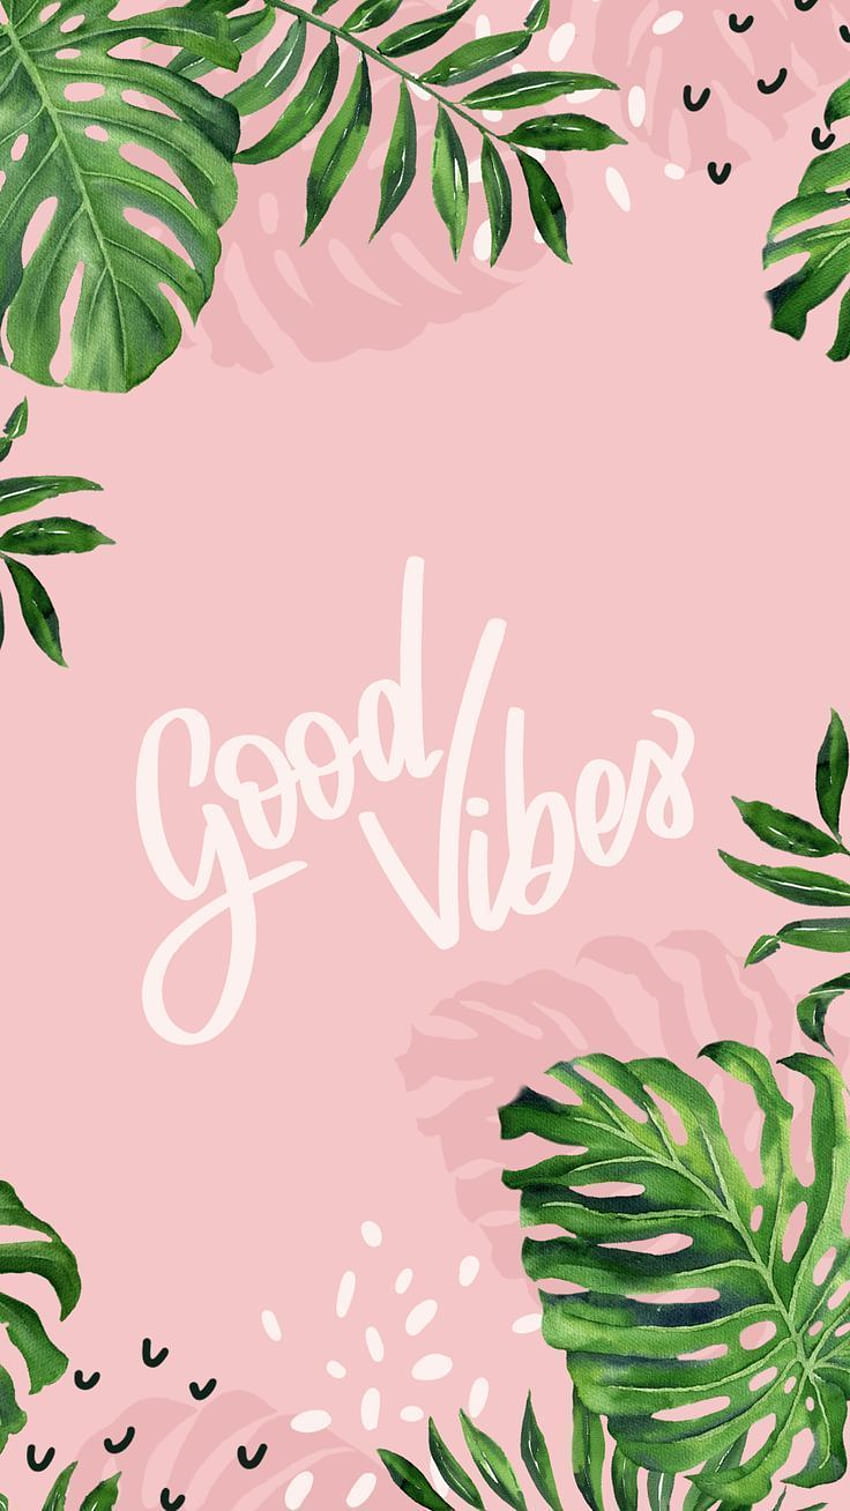 Good Vibes from Gocase, leaves, fern,. - HD phone wallpaper